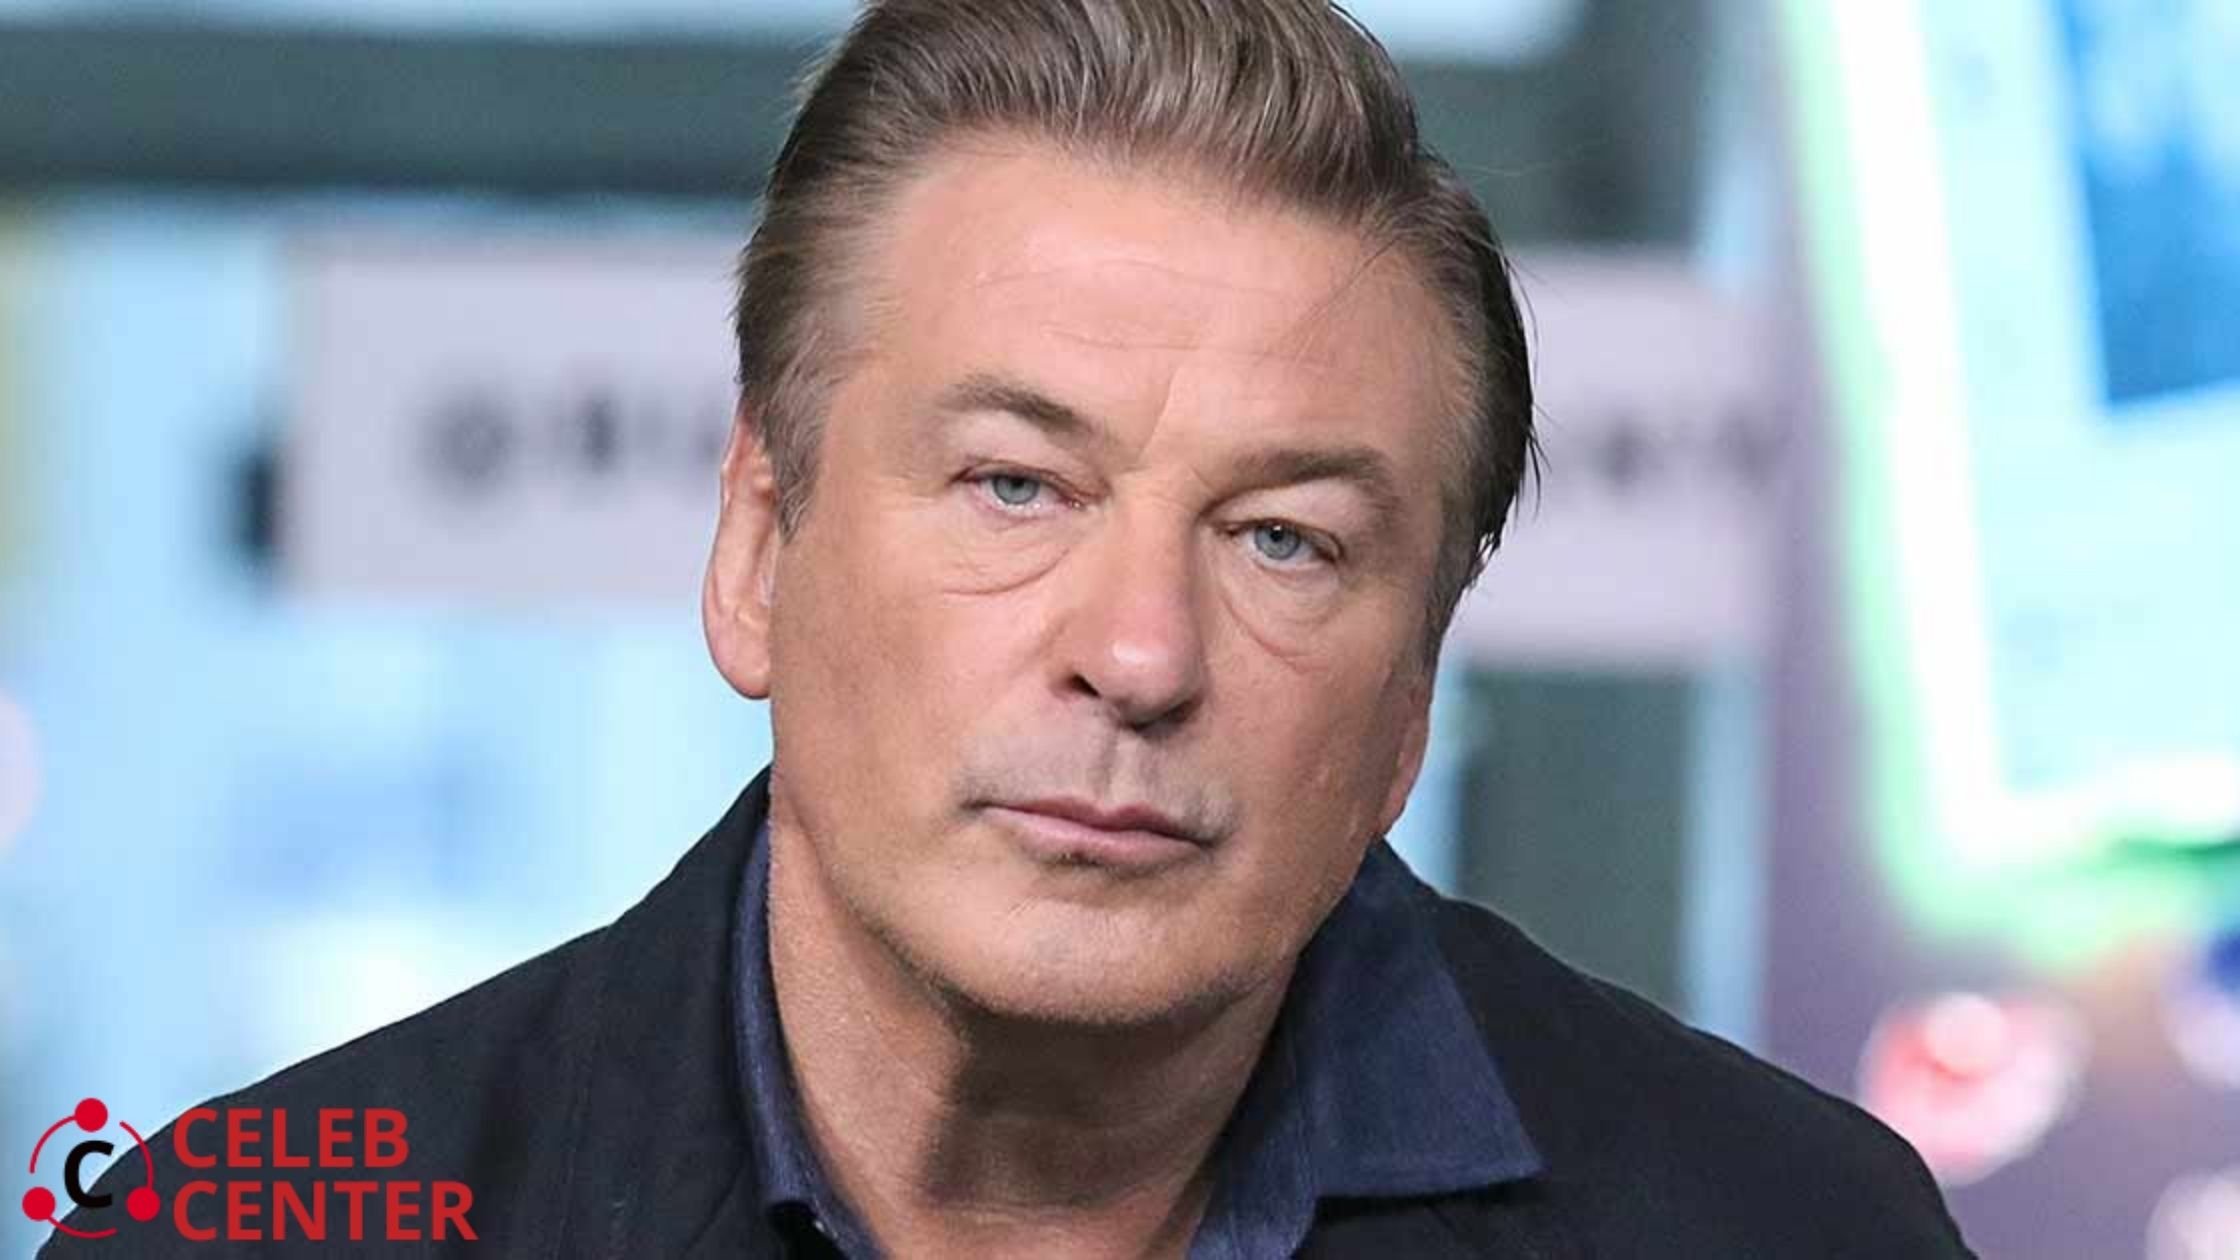 Alec Baldwin Biography, Age, Height, Family, Wife & Net Worth